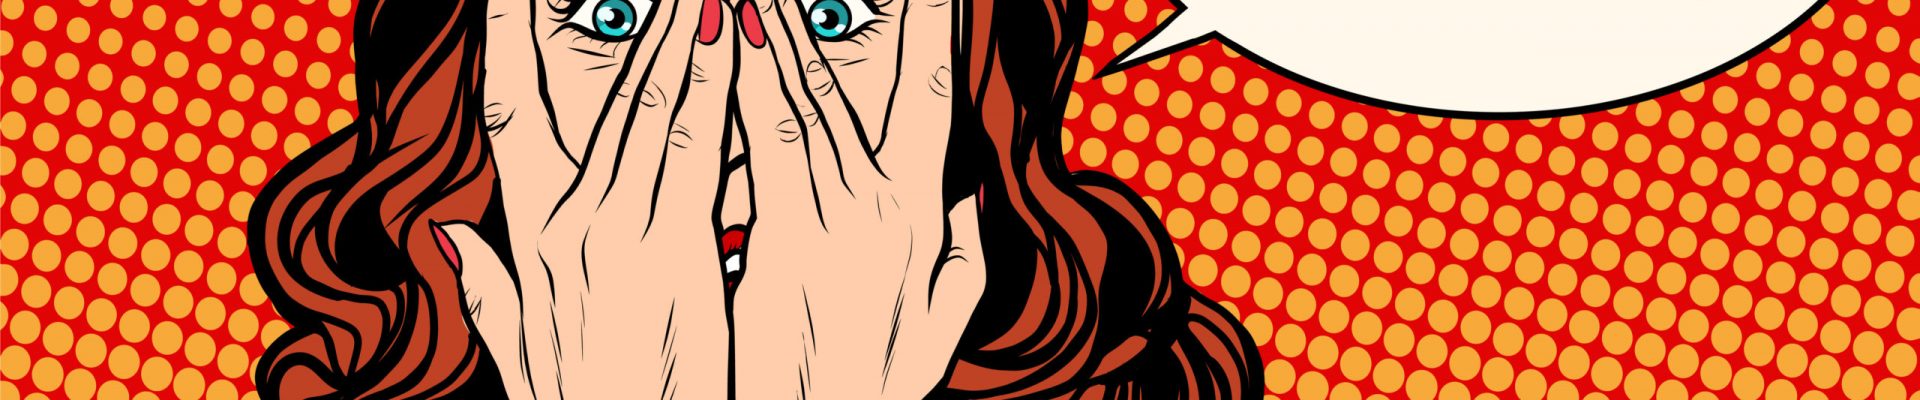 Surprised OMG shocked woman pop art retro style. The girl in the emotions. Wow effect